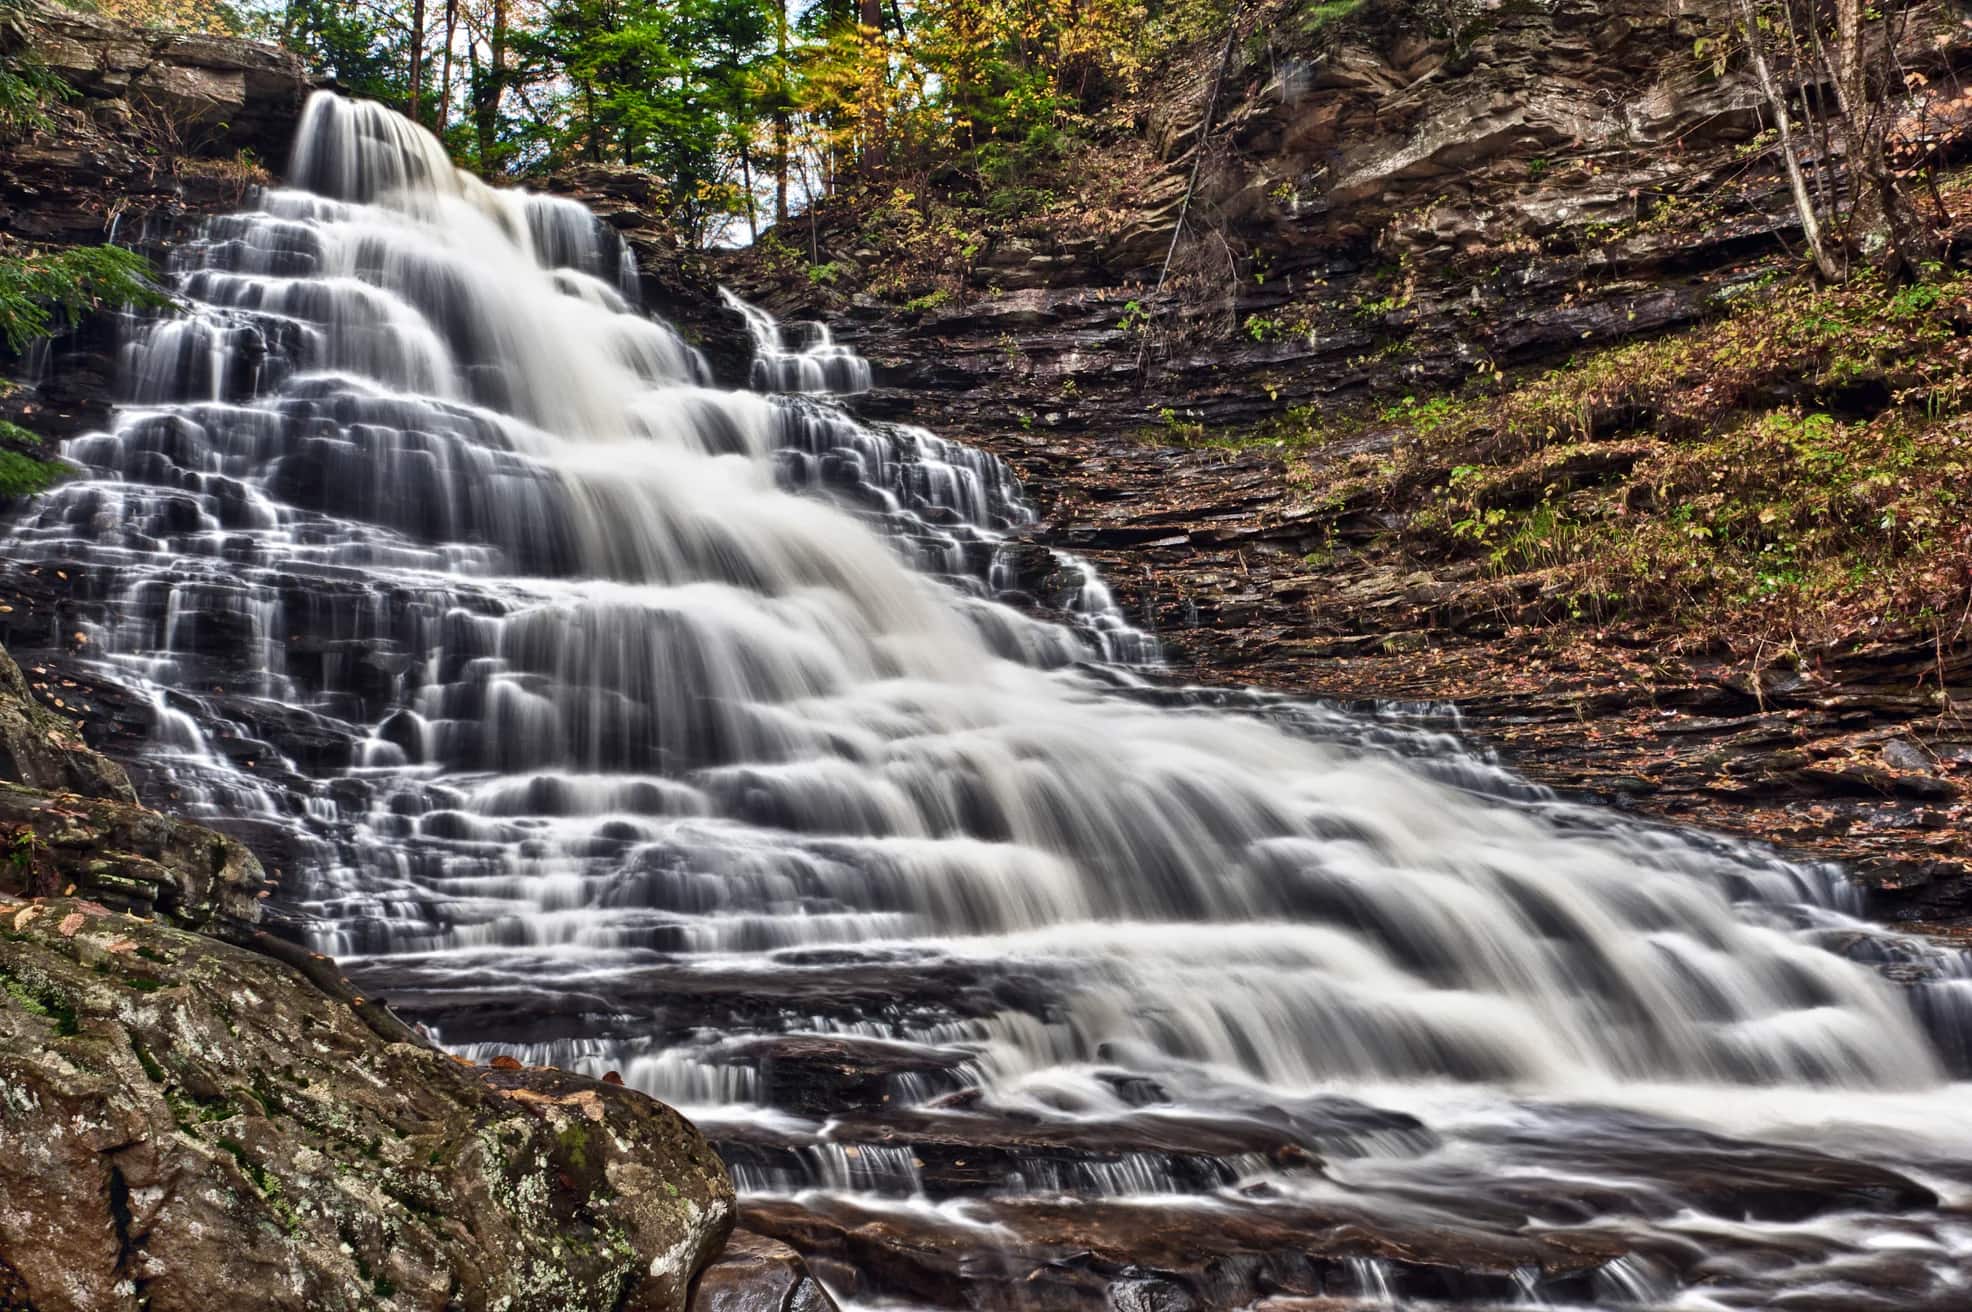 Cascading waterfalls caught in motion at Ricketts Glen State Park.